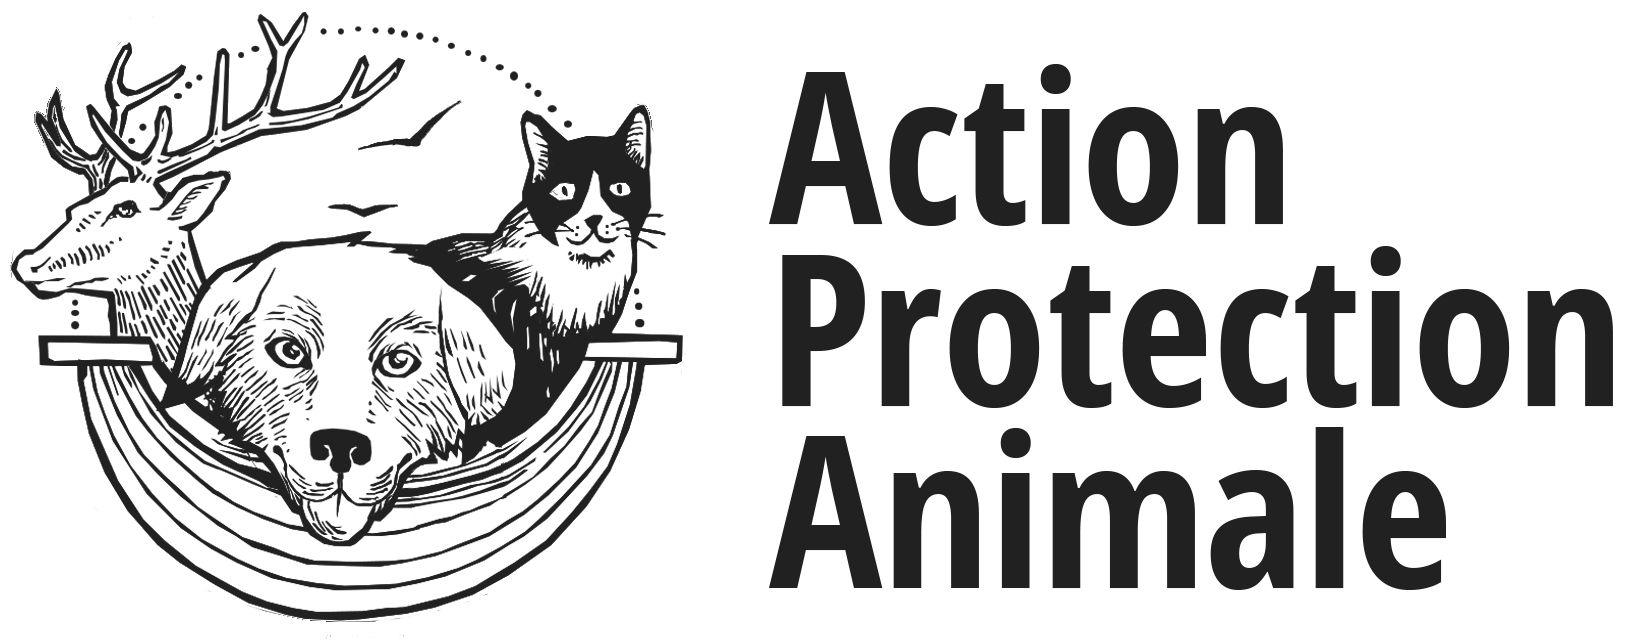 Boutique - Action Protection Animale